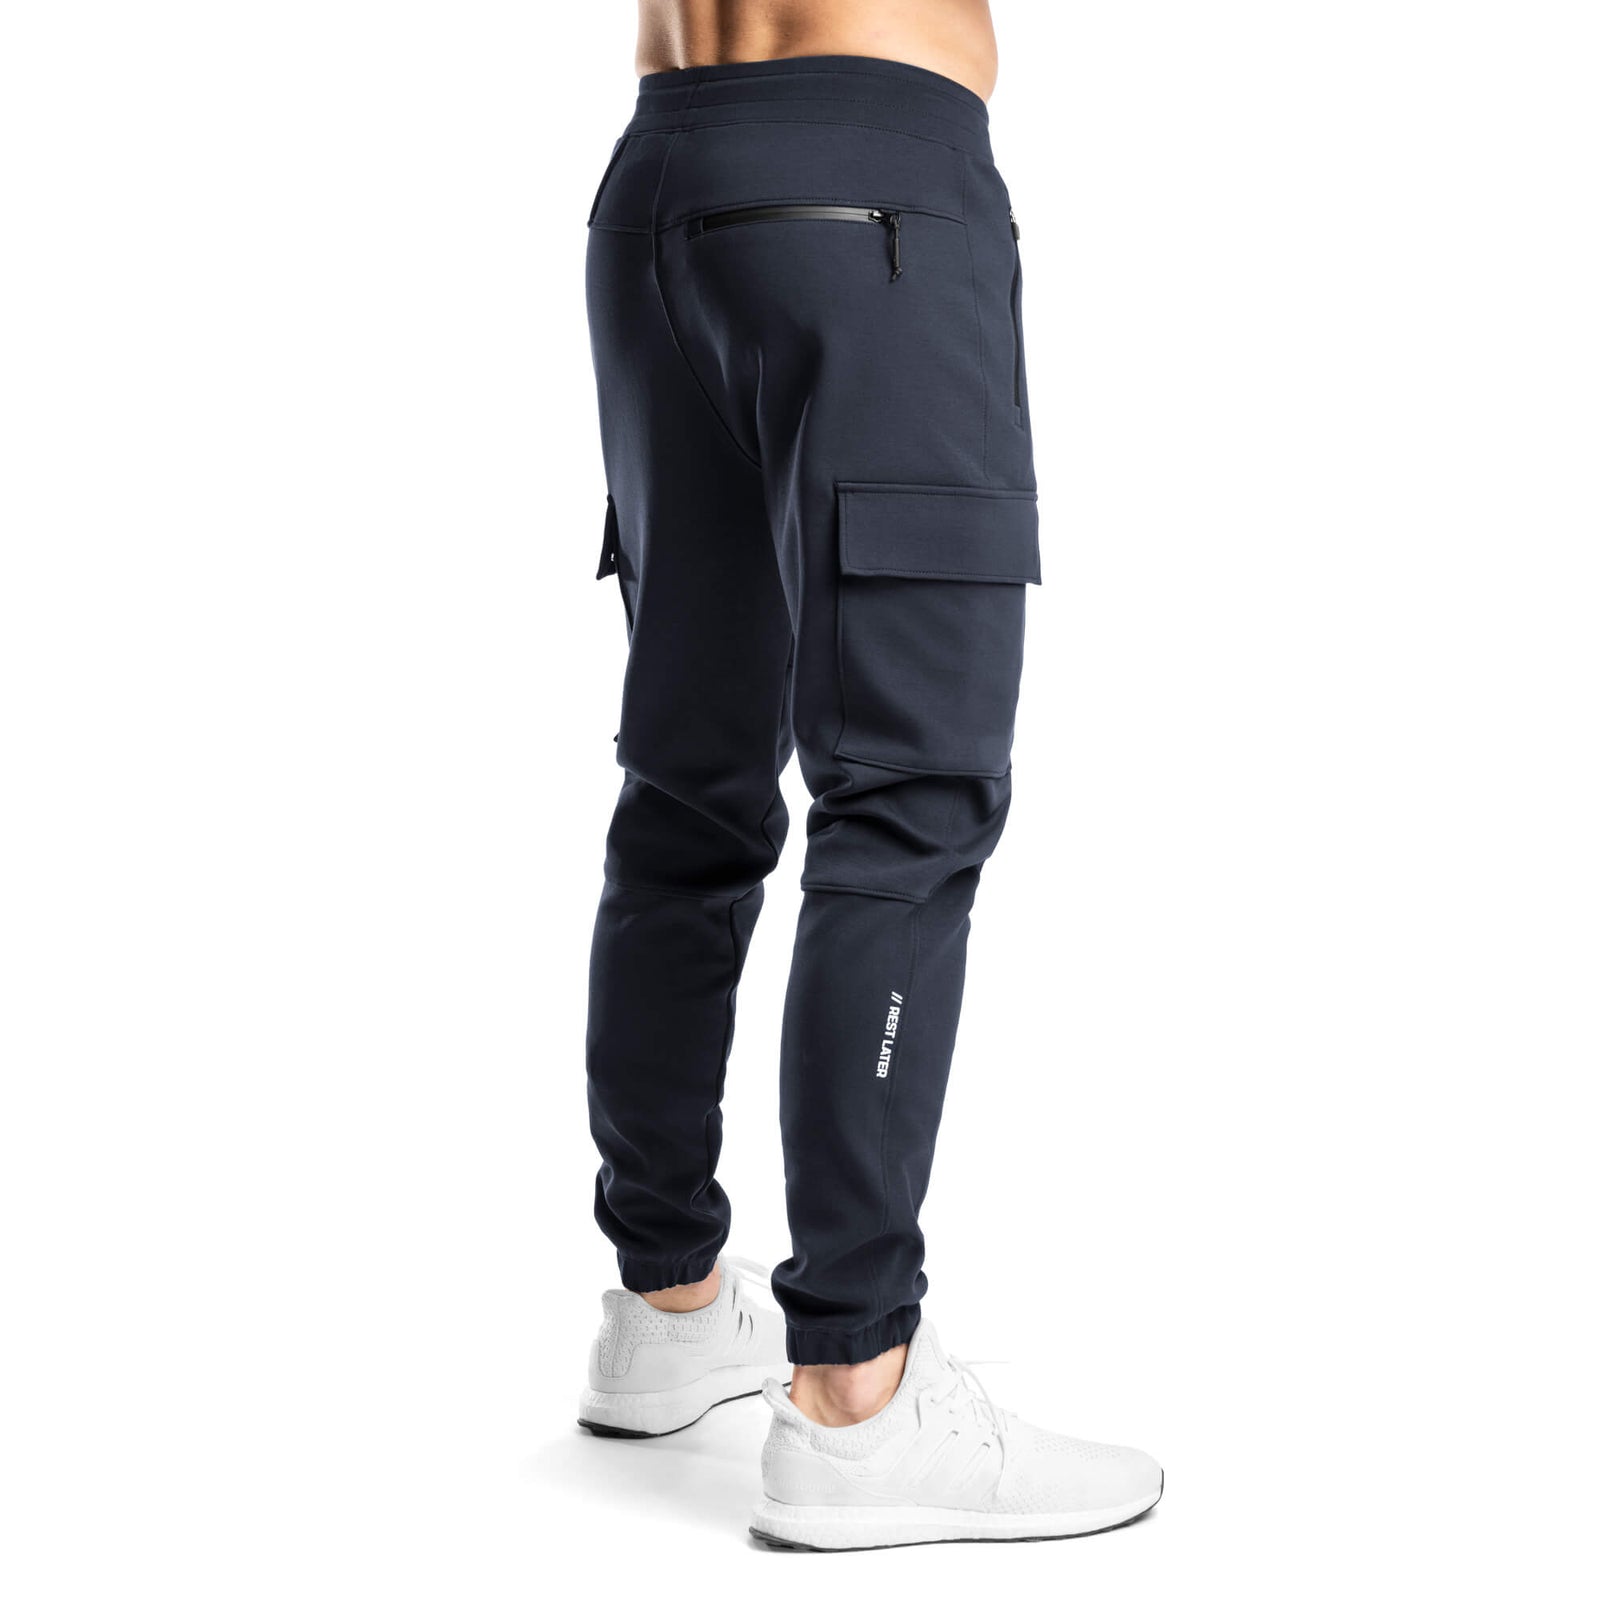 Rest Later Pants - Charcoal Marl - Rise